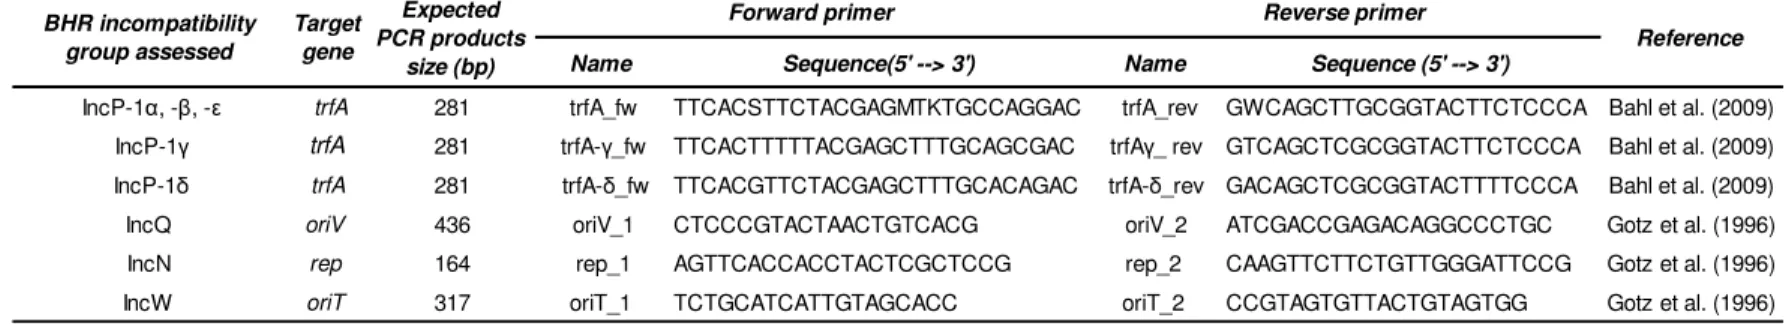 Table III. Sequence of the primers used for the amplification, target genes and expected fragment length of the  polymerase chain reaction products correspondent the different incompatibility groups and subgroups tested